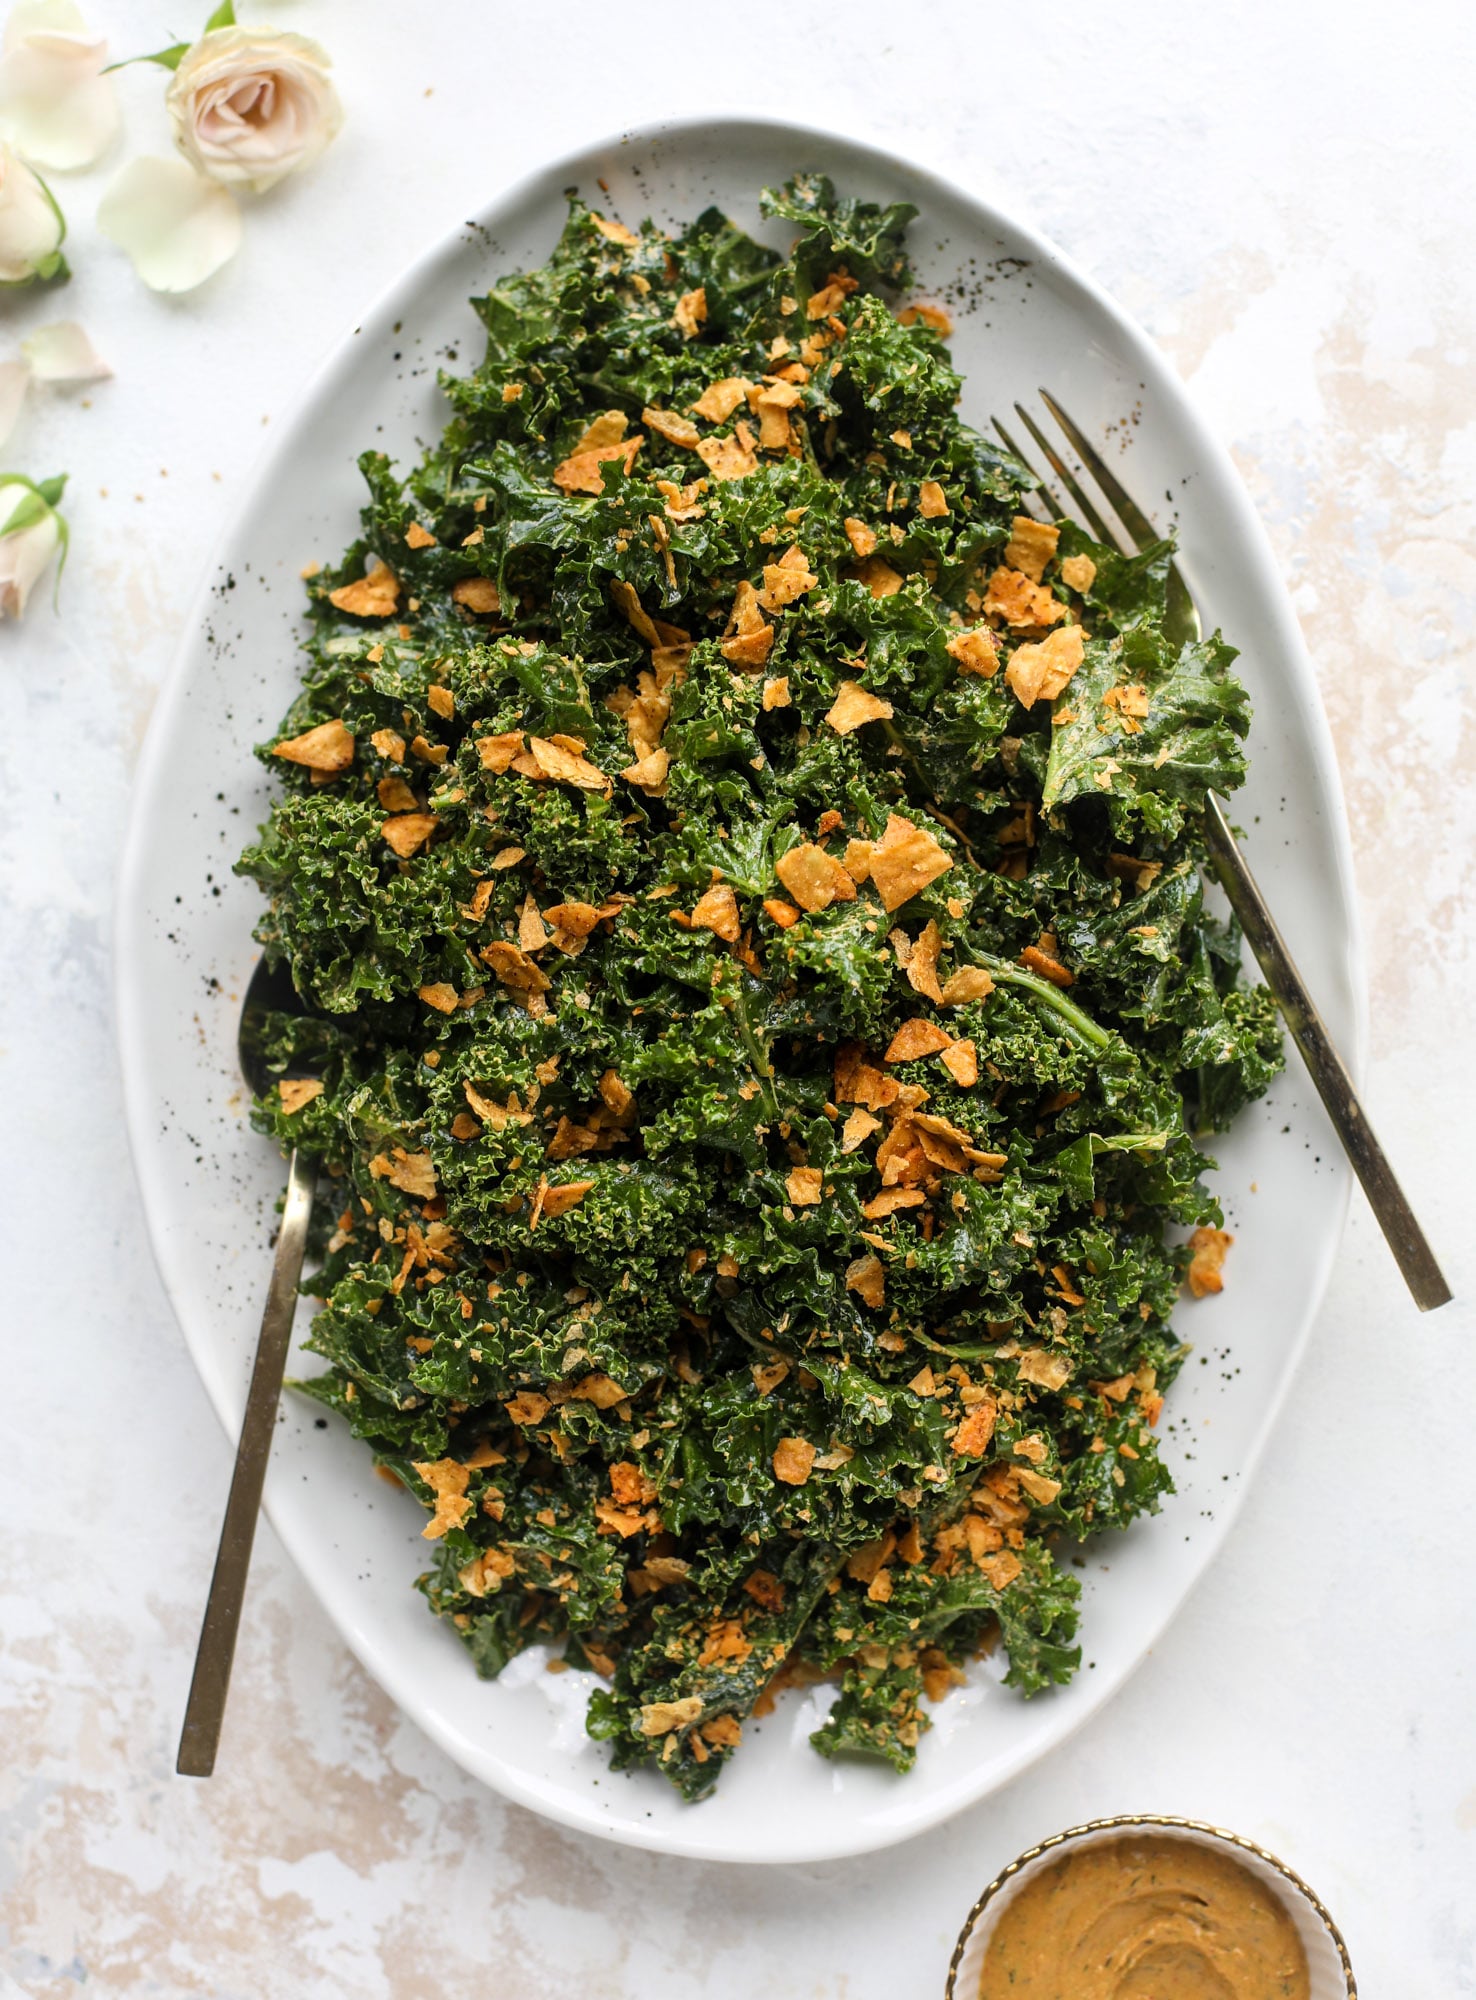 This cool ranch kale salad is loaded with all the flavor of our favorite chips. Simple enough to serve with almost everything, it's ridiculously flavorful!